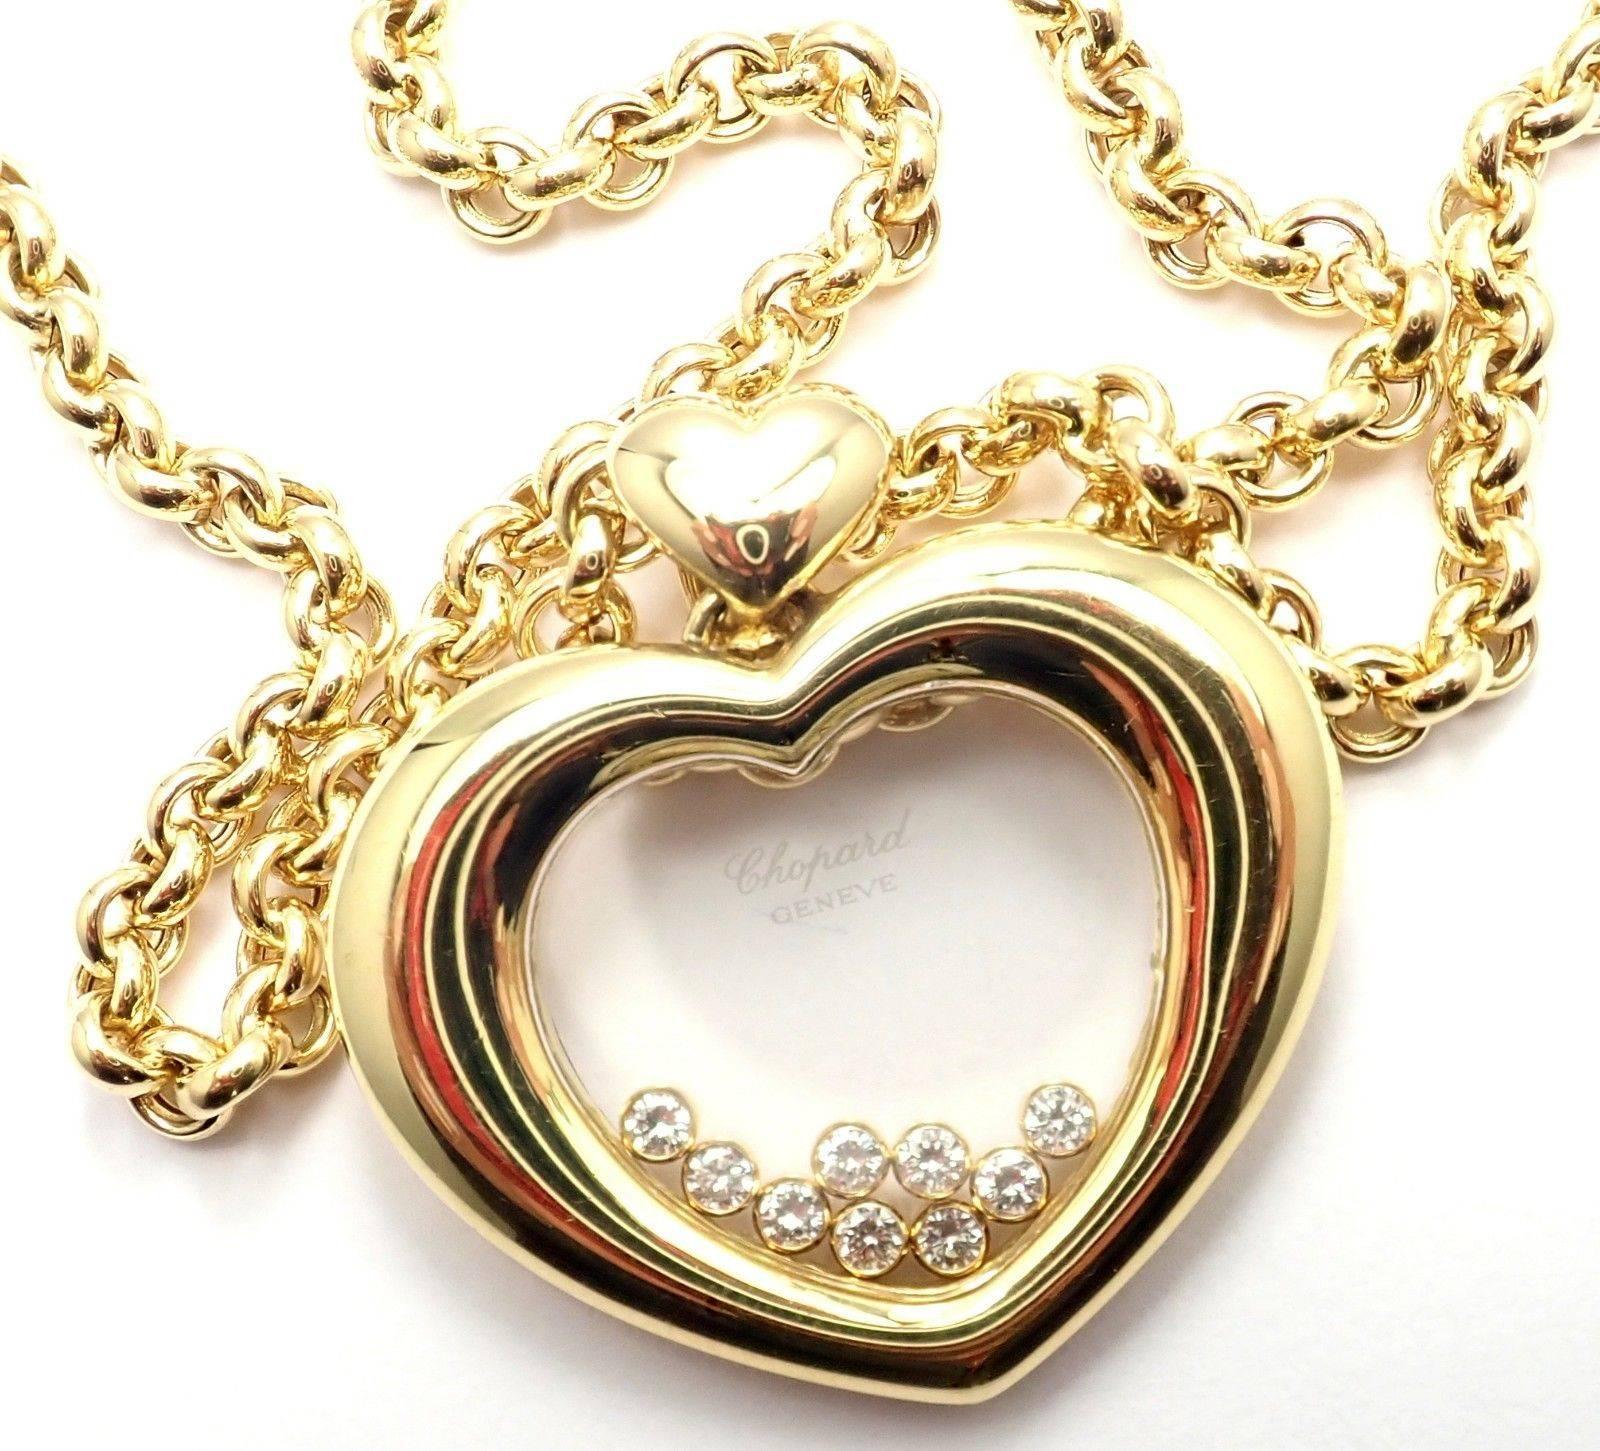 18k Yellow Gold Happy Diamond Large Heart Pendant Necklace by Chopard. 
With 39 round brilliant cut diamonds = VVS1 clarity, E color total weight .58ct
Details: 
Length: 20